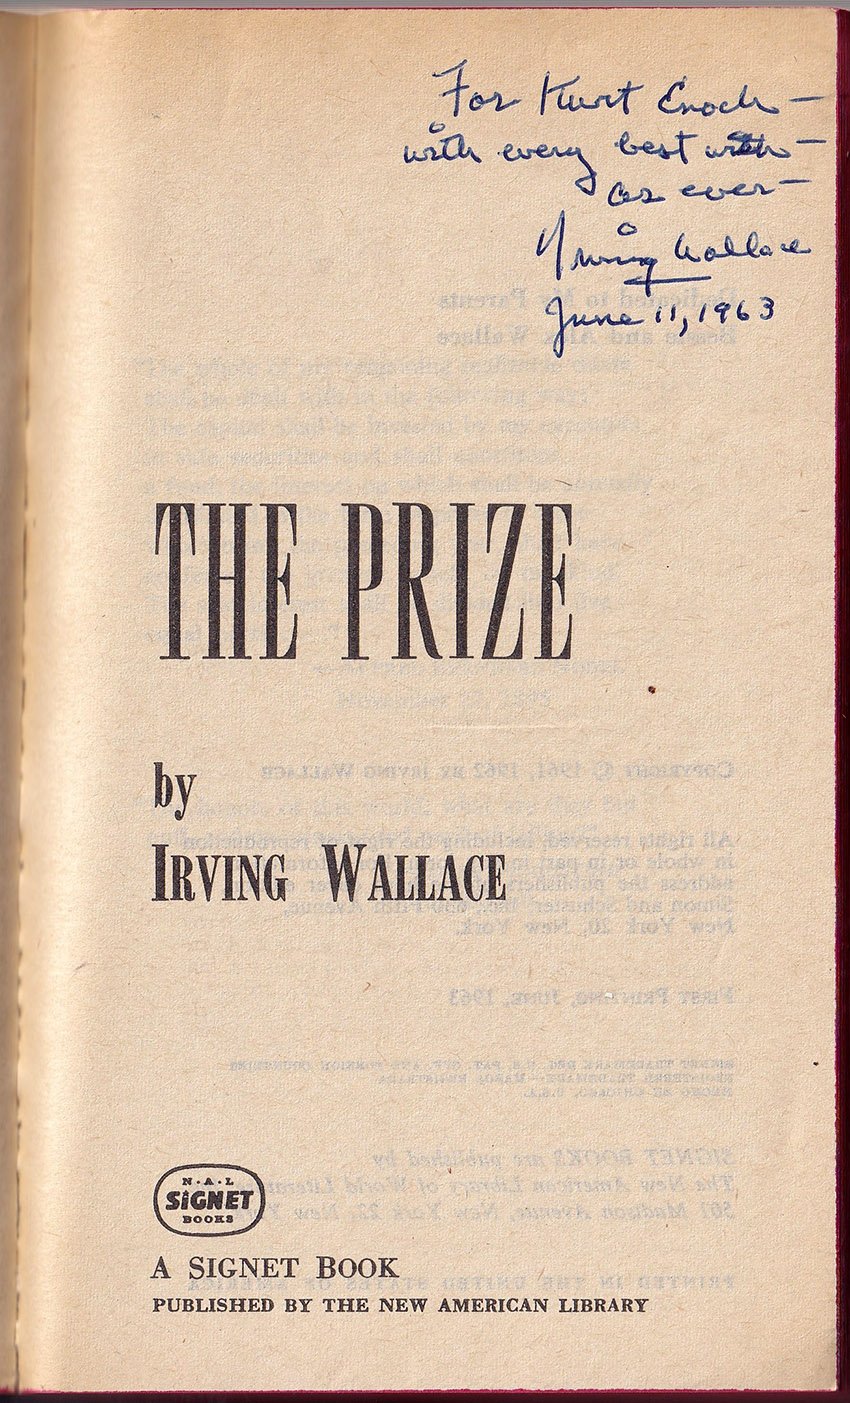 Wallace, Irving - Signed Book "The Prize" - Tamino